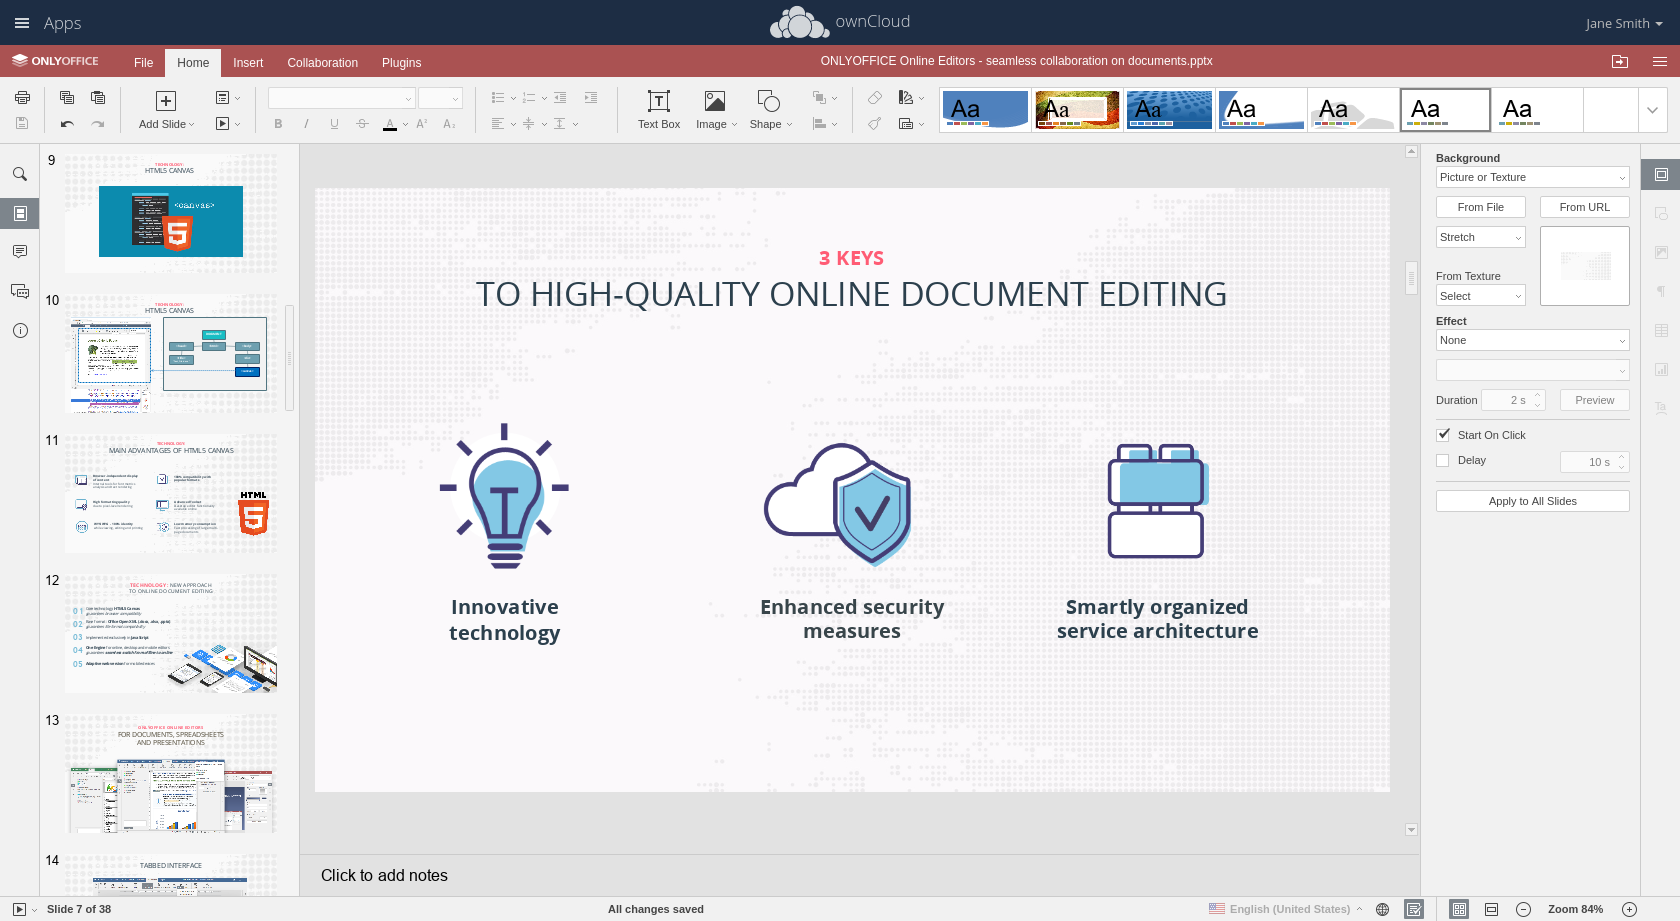 ONLYOFFICE Presentation Editor in ownCloud